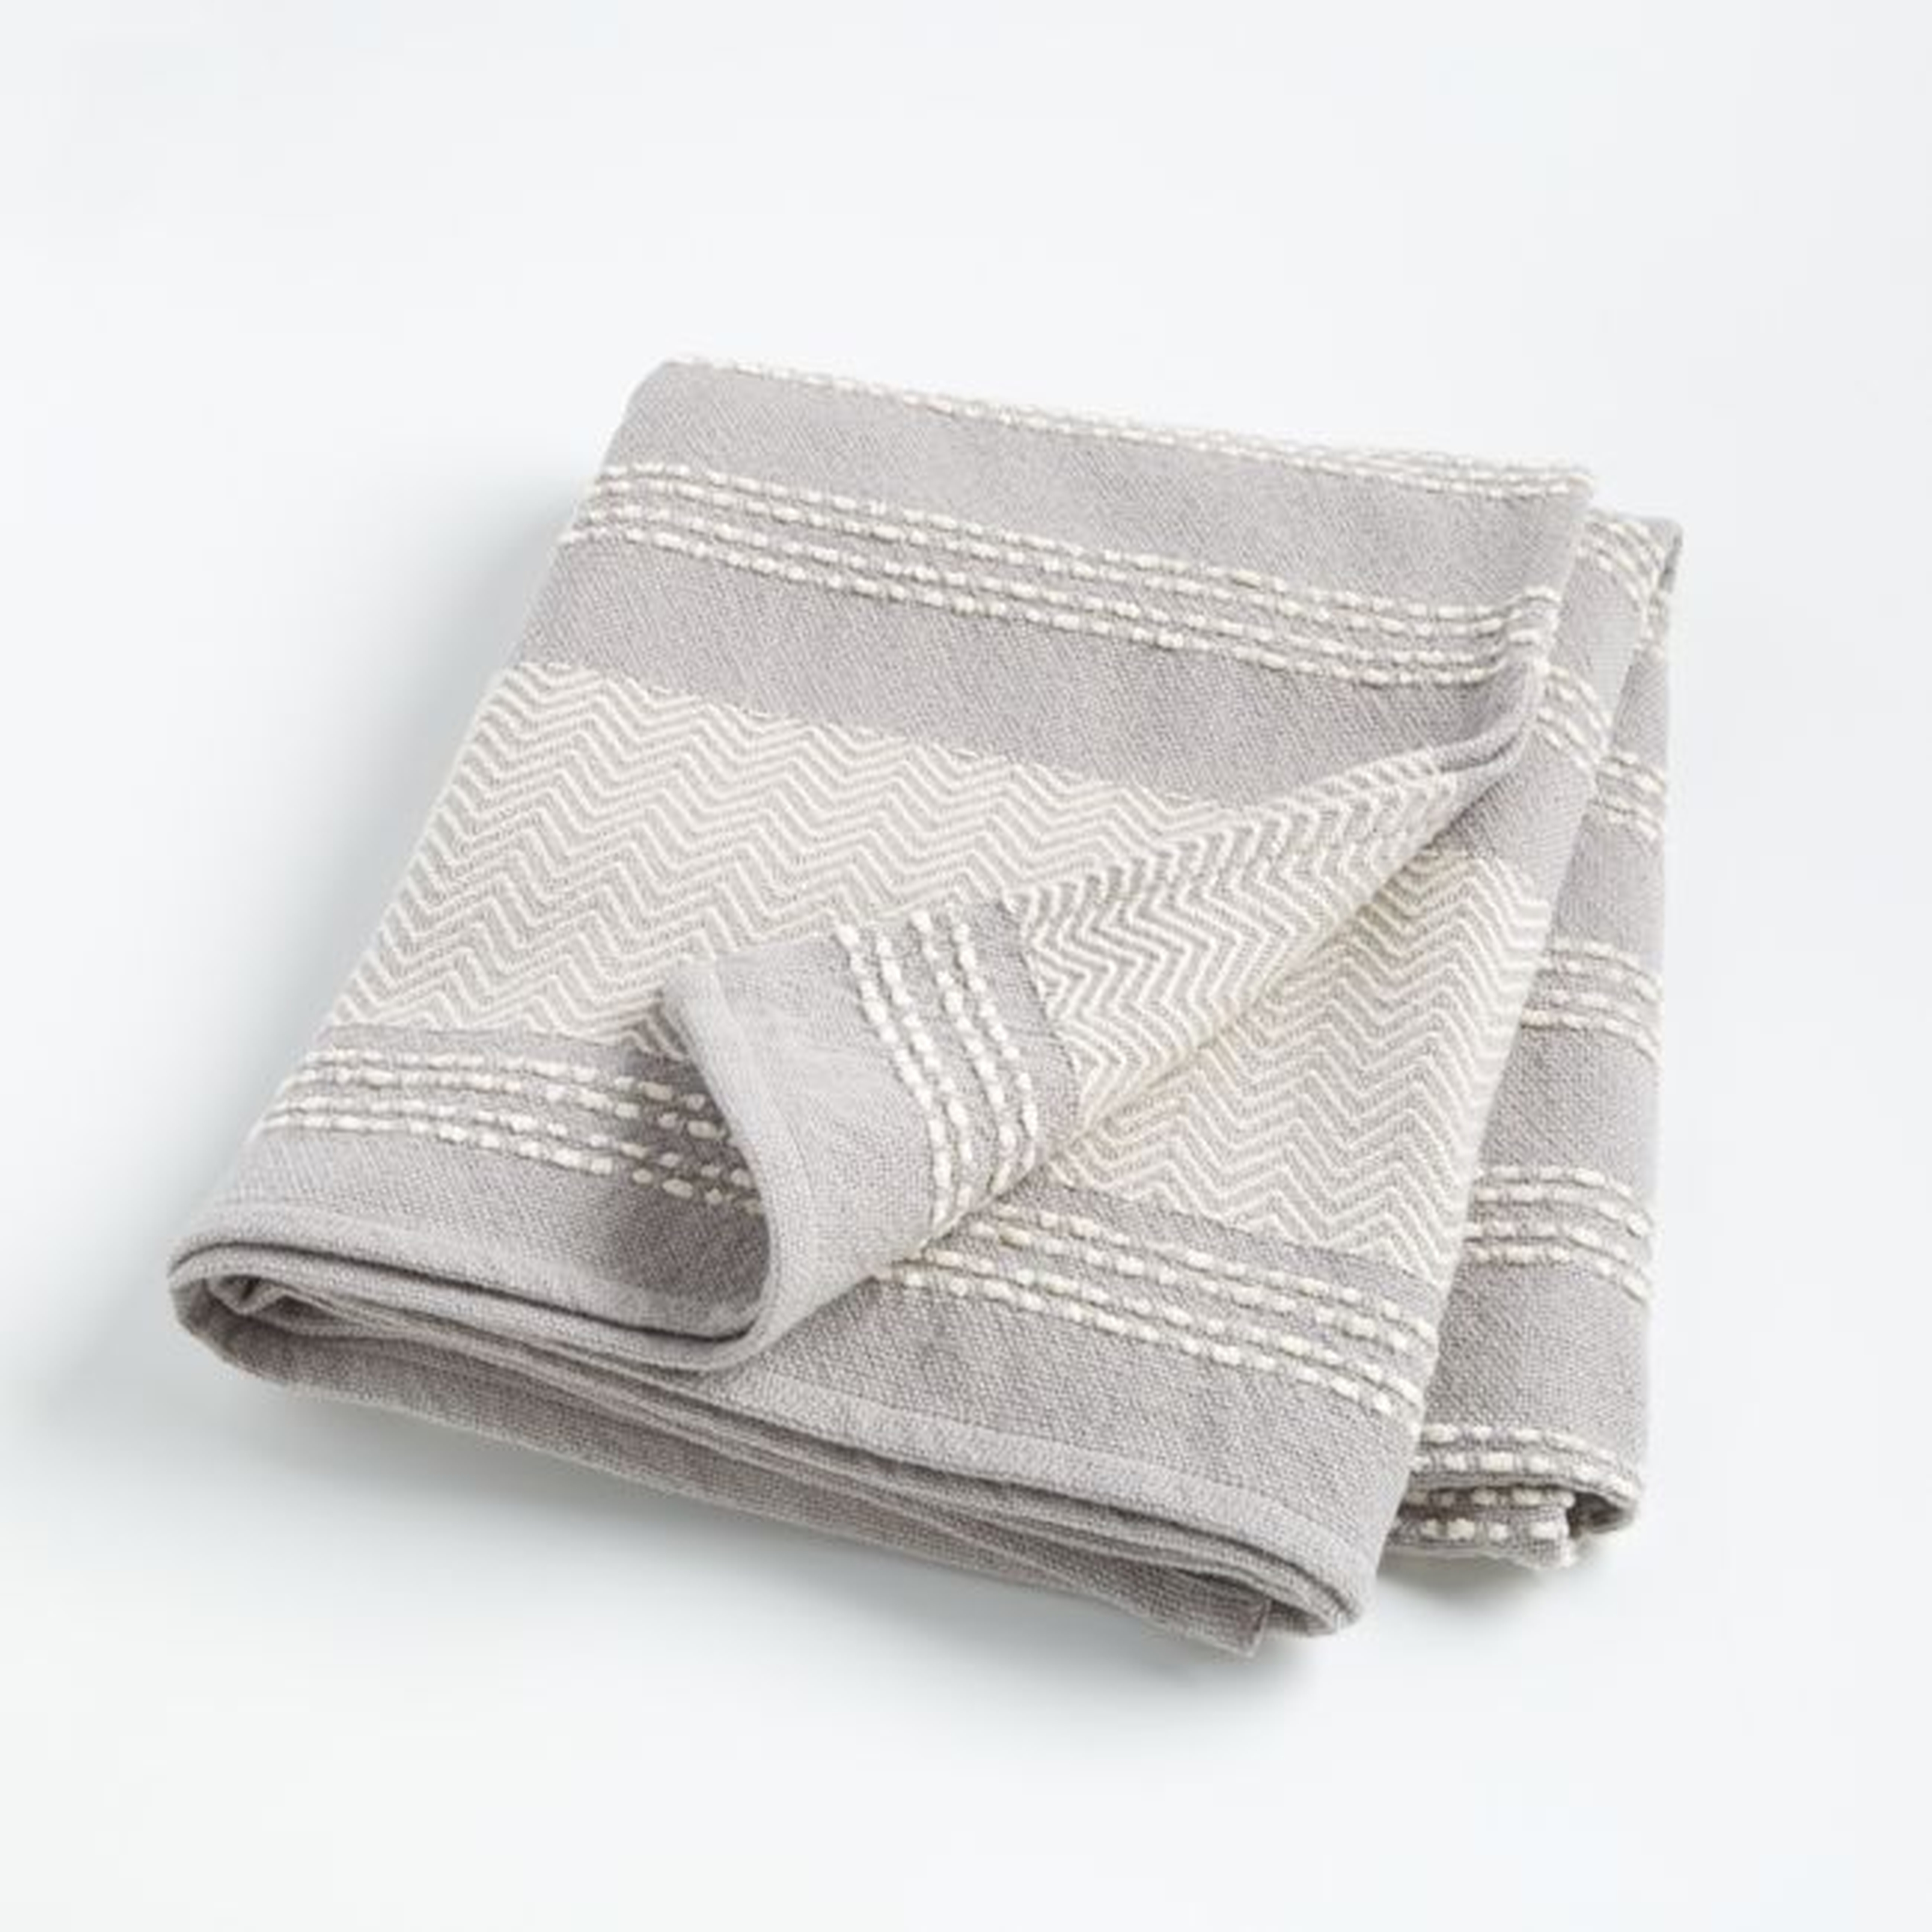 Textured Kids Throw Blanket, Gray - Crate and Barrel